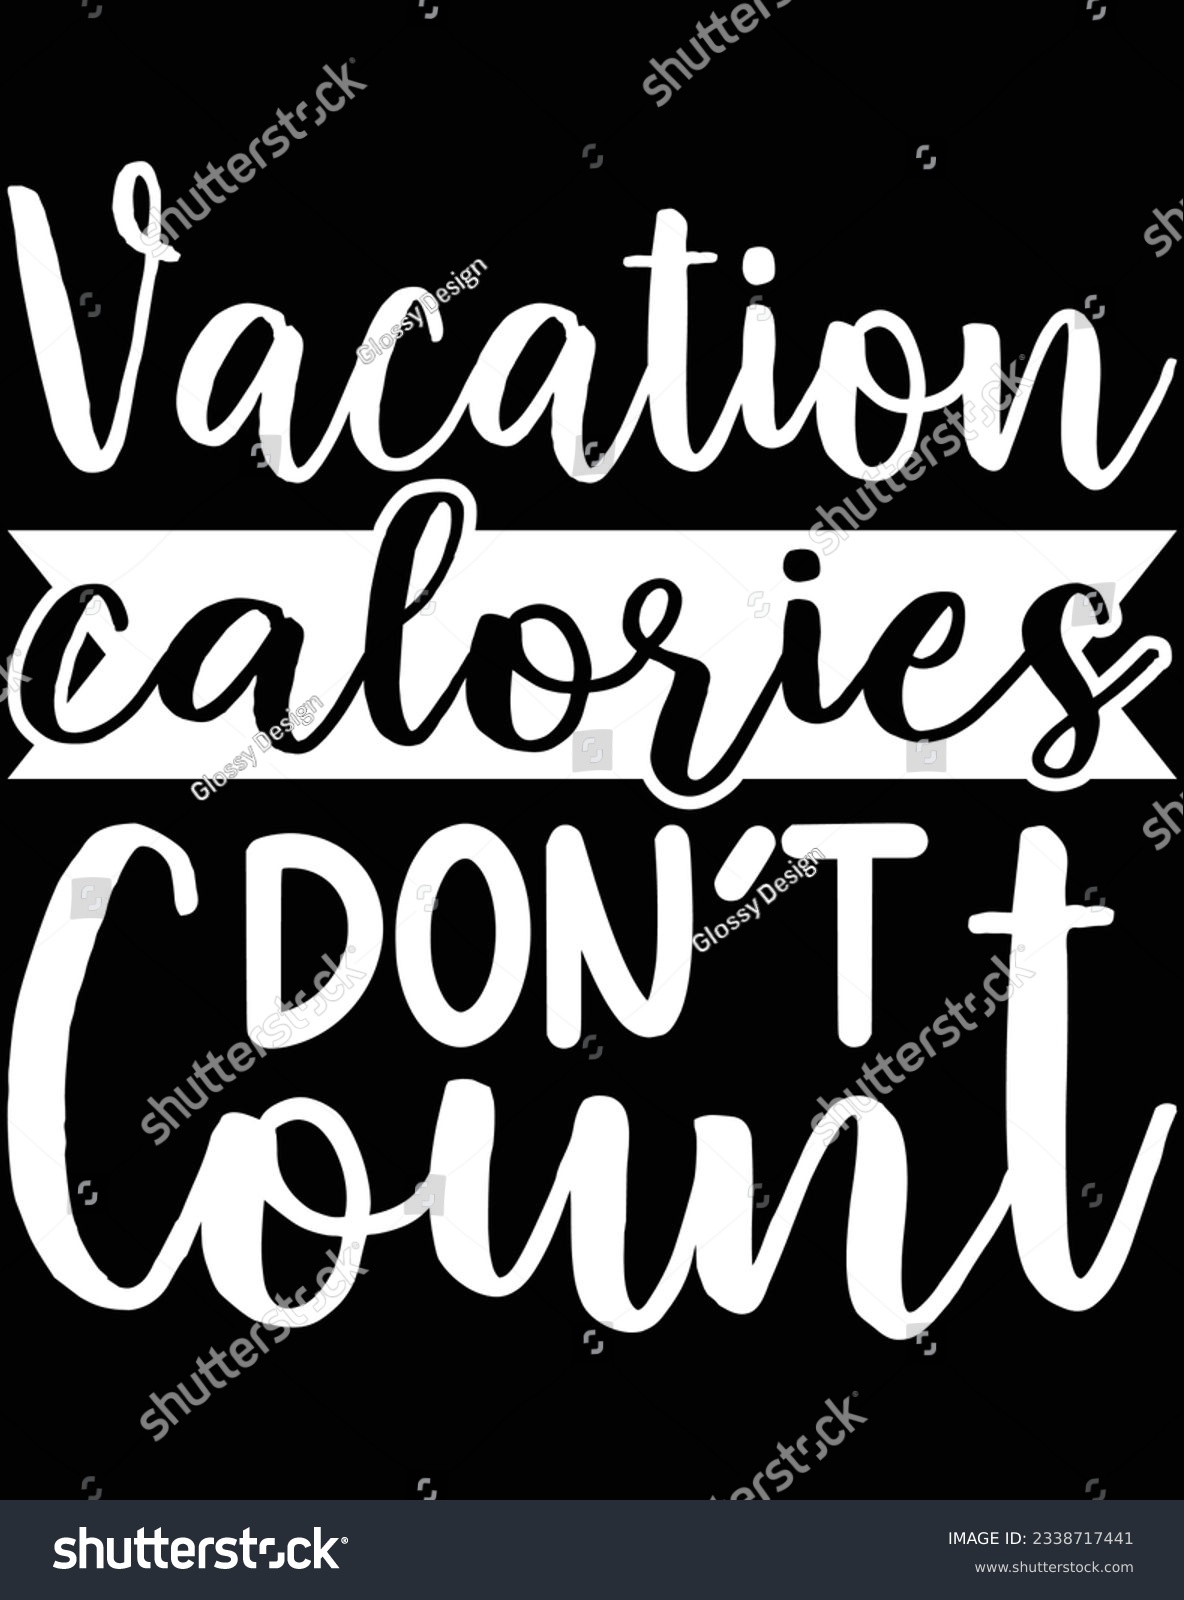 SVG of Vacation calories don't count EPS file for cutting machine. You can edit and print this vector art with EPS editor. svg